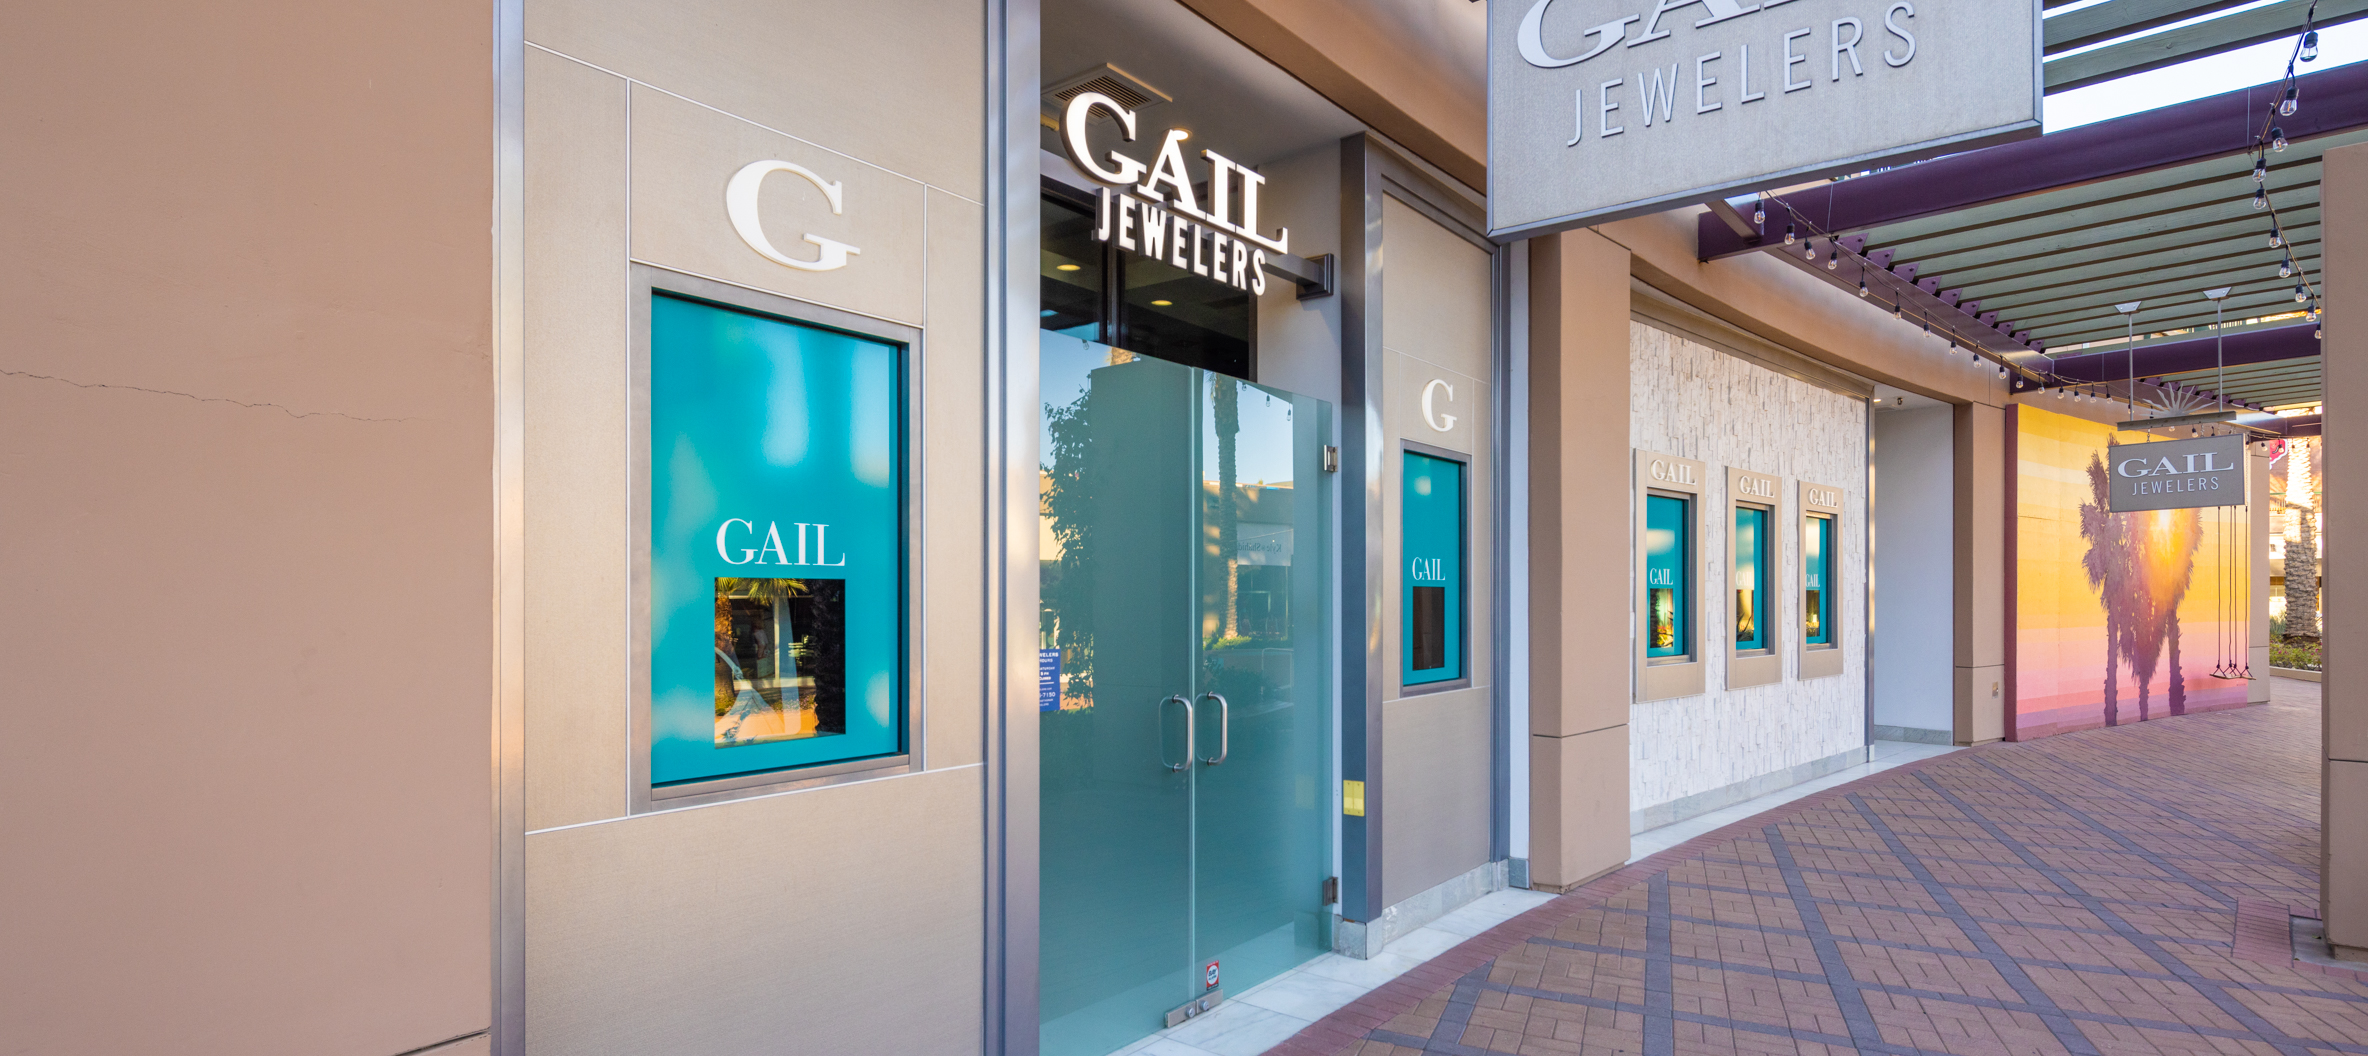 GAIL at The Gardens on El Paseo - Jewelry Store - Gail Jewelers